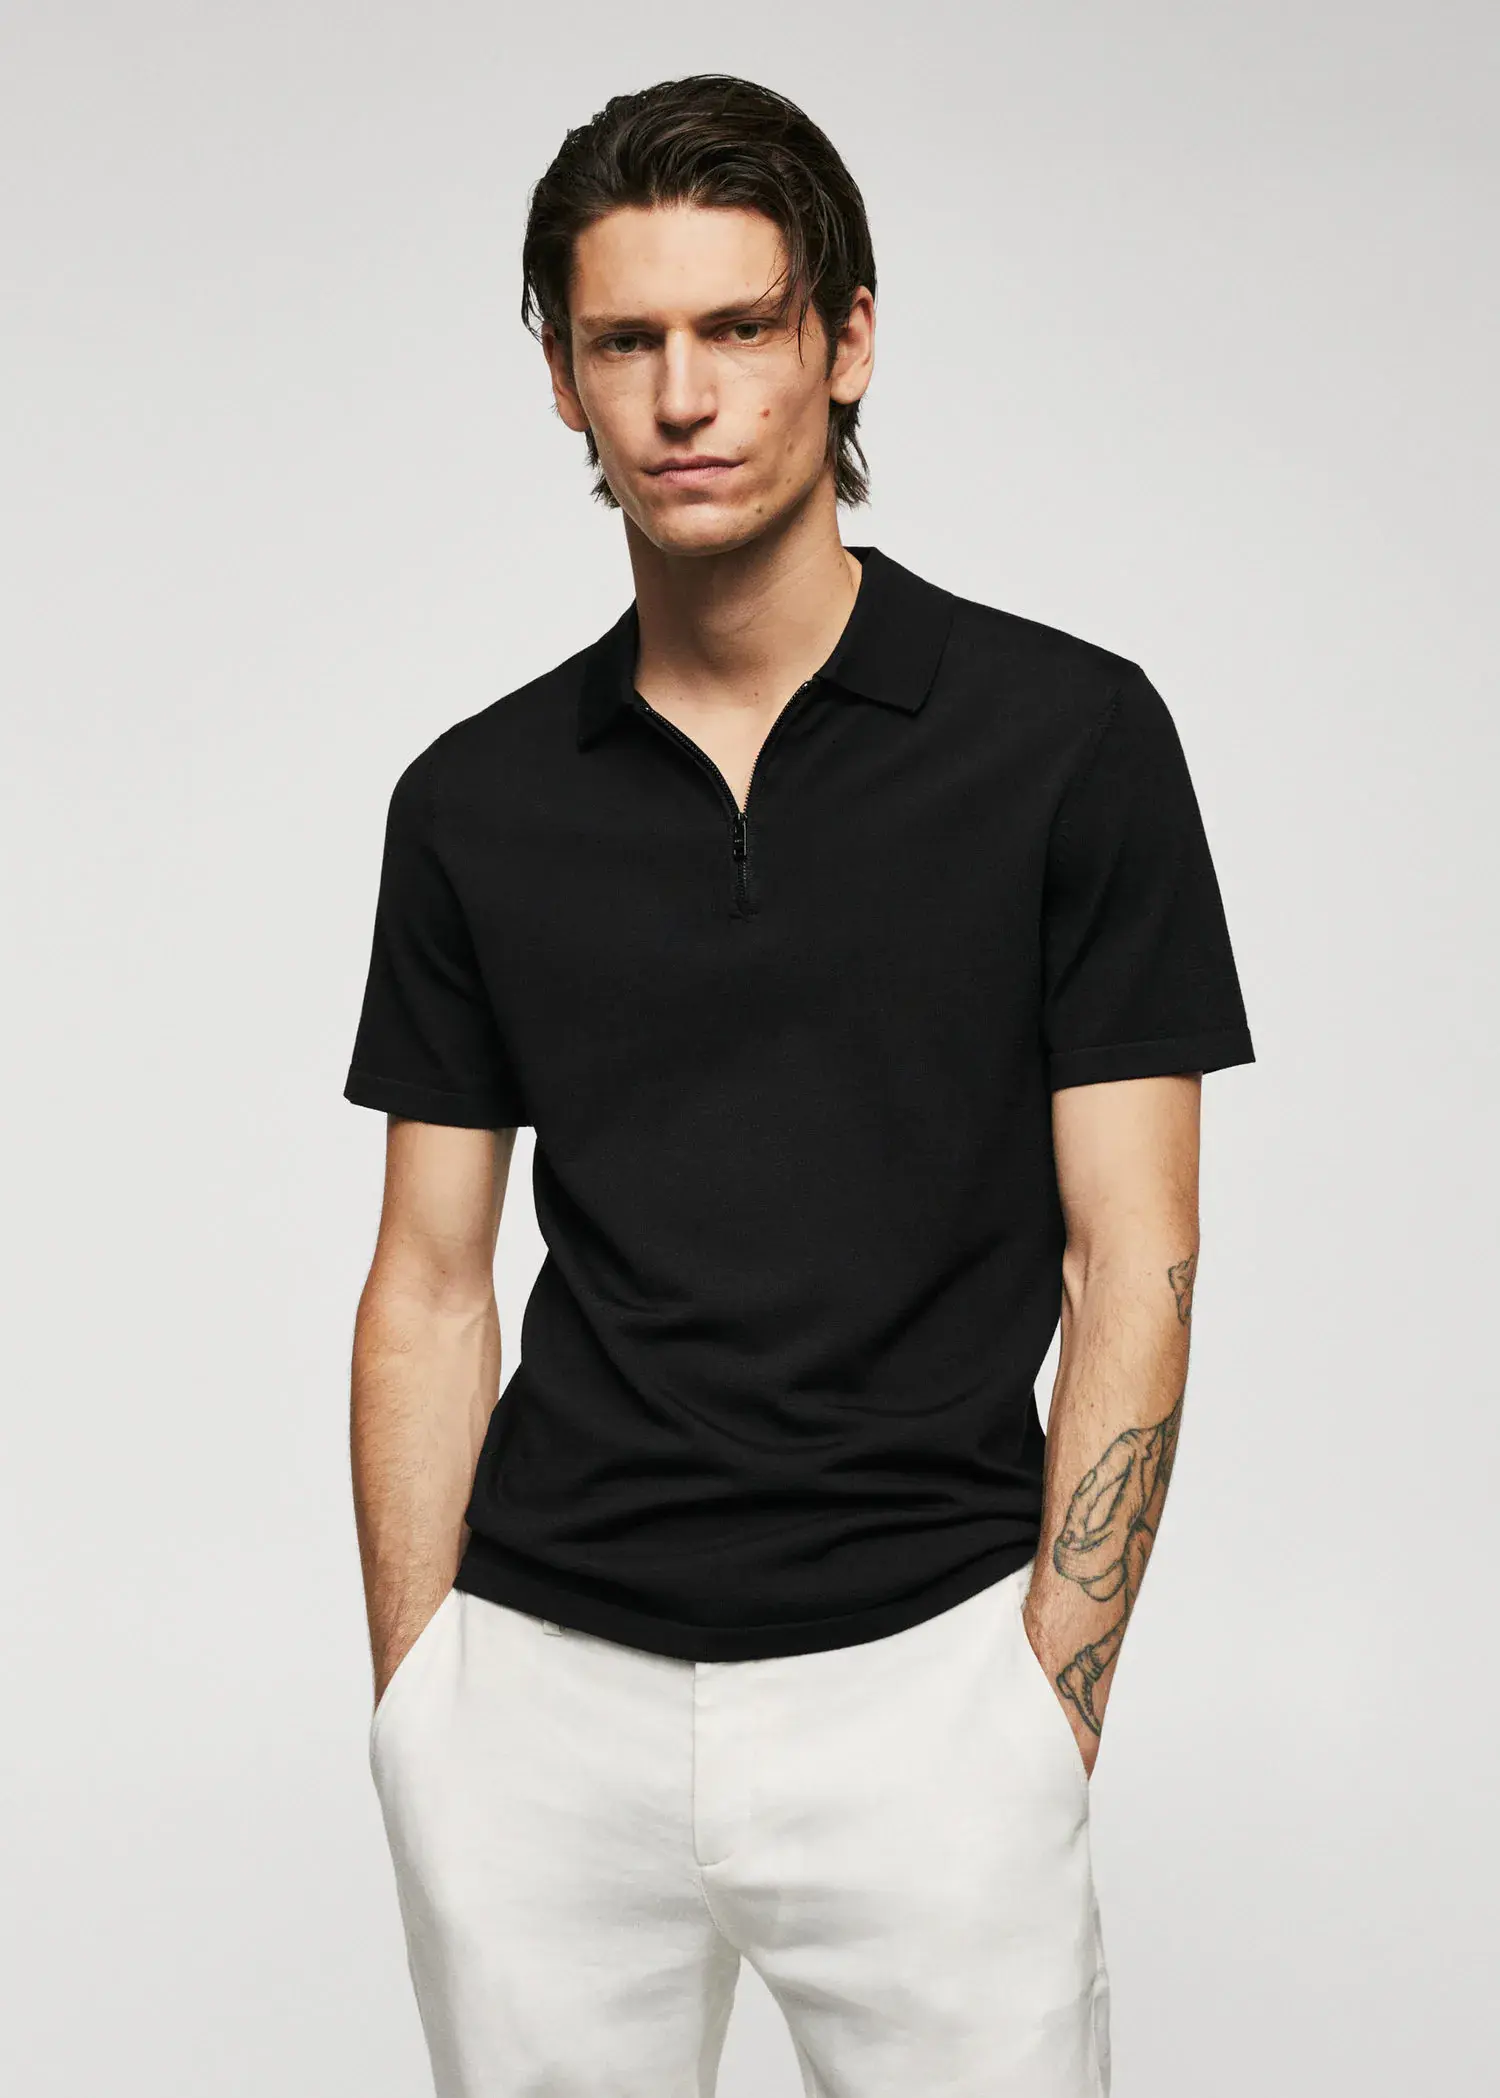 Mango Fine-knit polo shirt with zipper. a man in a black polo shirt and white pants. 